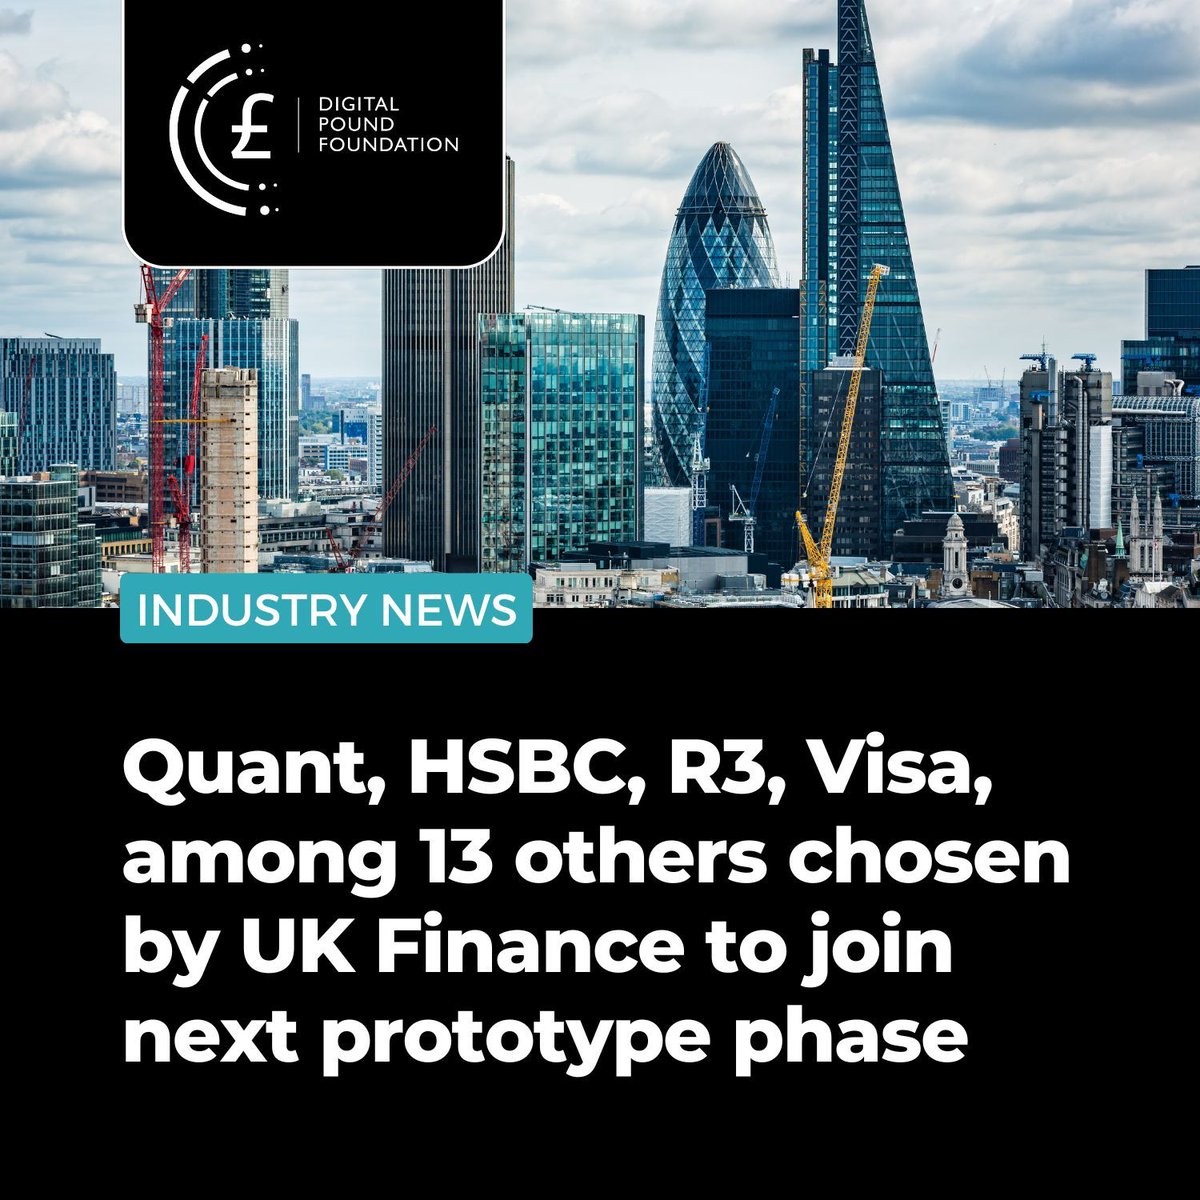 A new phase of experimentation has been announced for the #UK #RLN, involving the technical expertise of #Quant, #R3, #DXC, and #Coadjute, with collaboration from 13 other organisations, including #HSBC, #Visa, #Citi, #Mastercard, and #Santander 👉 buff.ly/3xxfOng